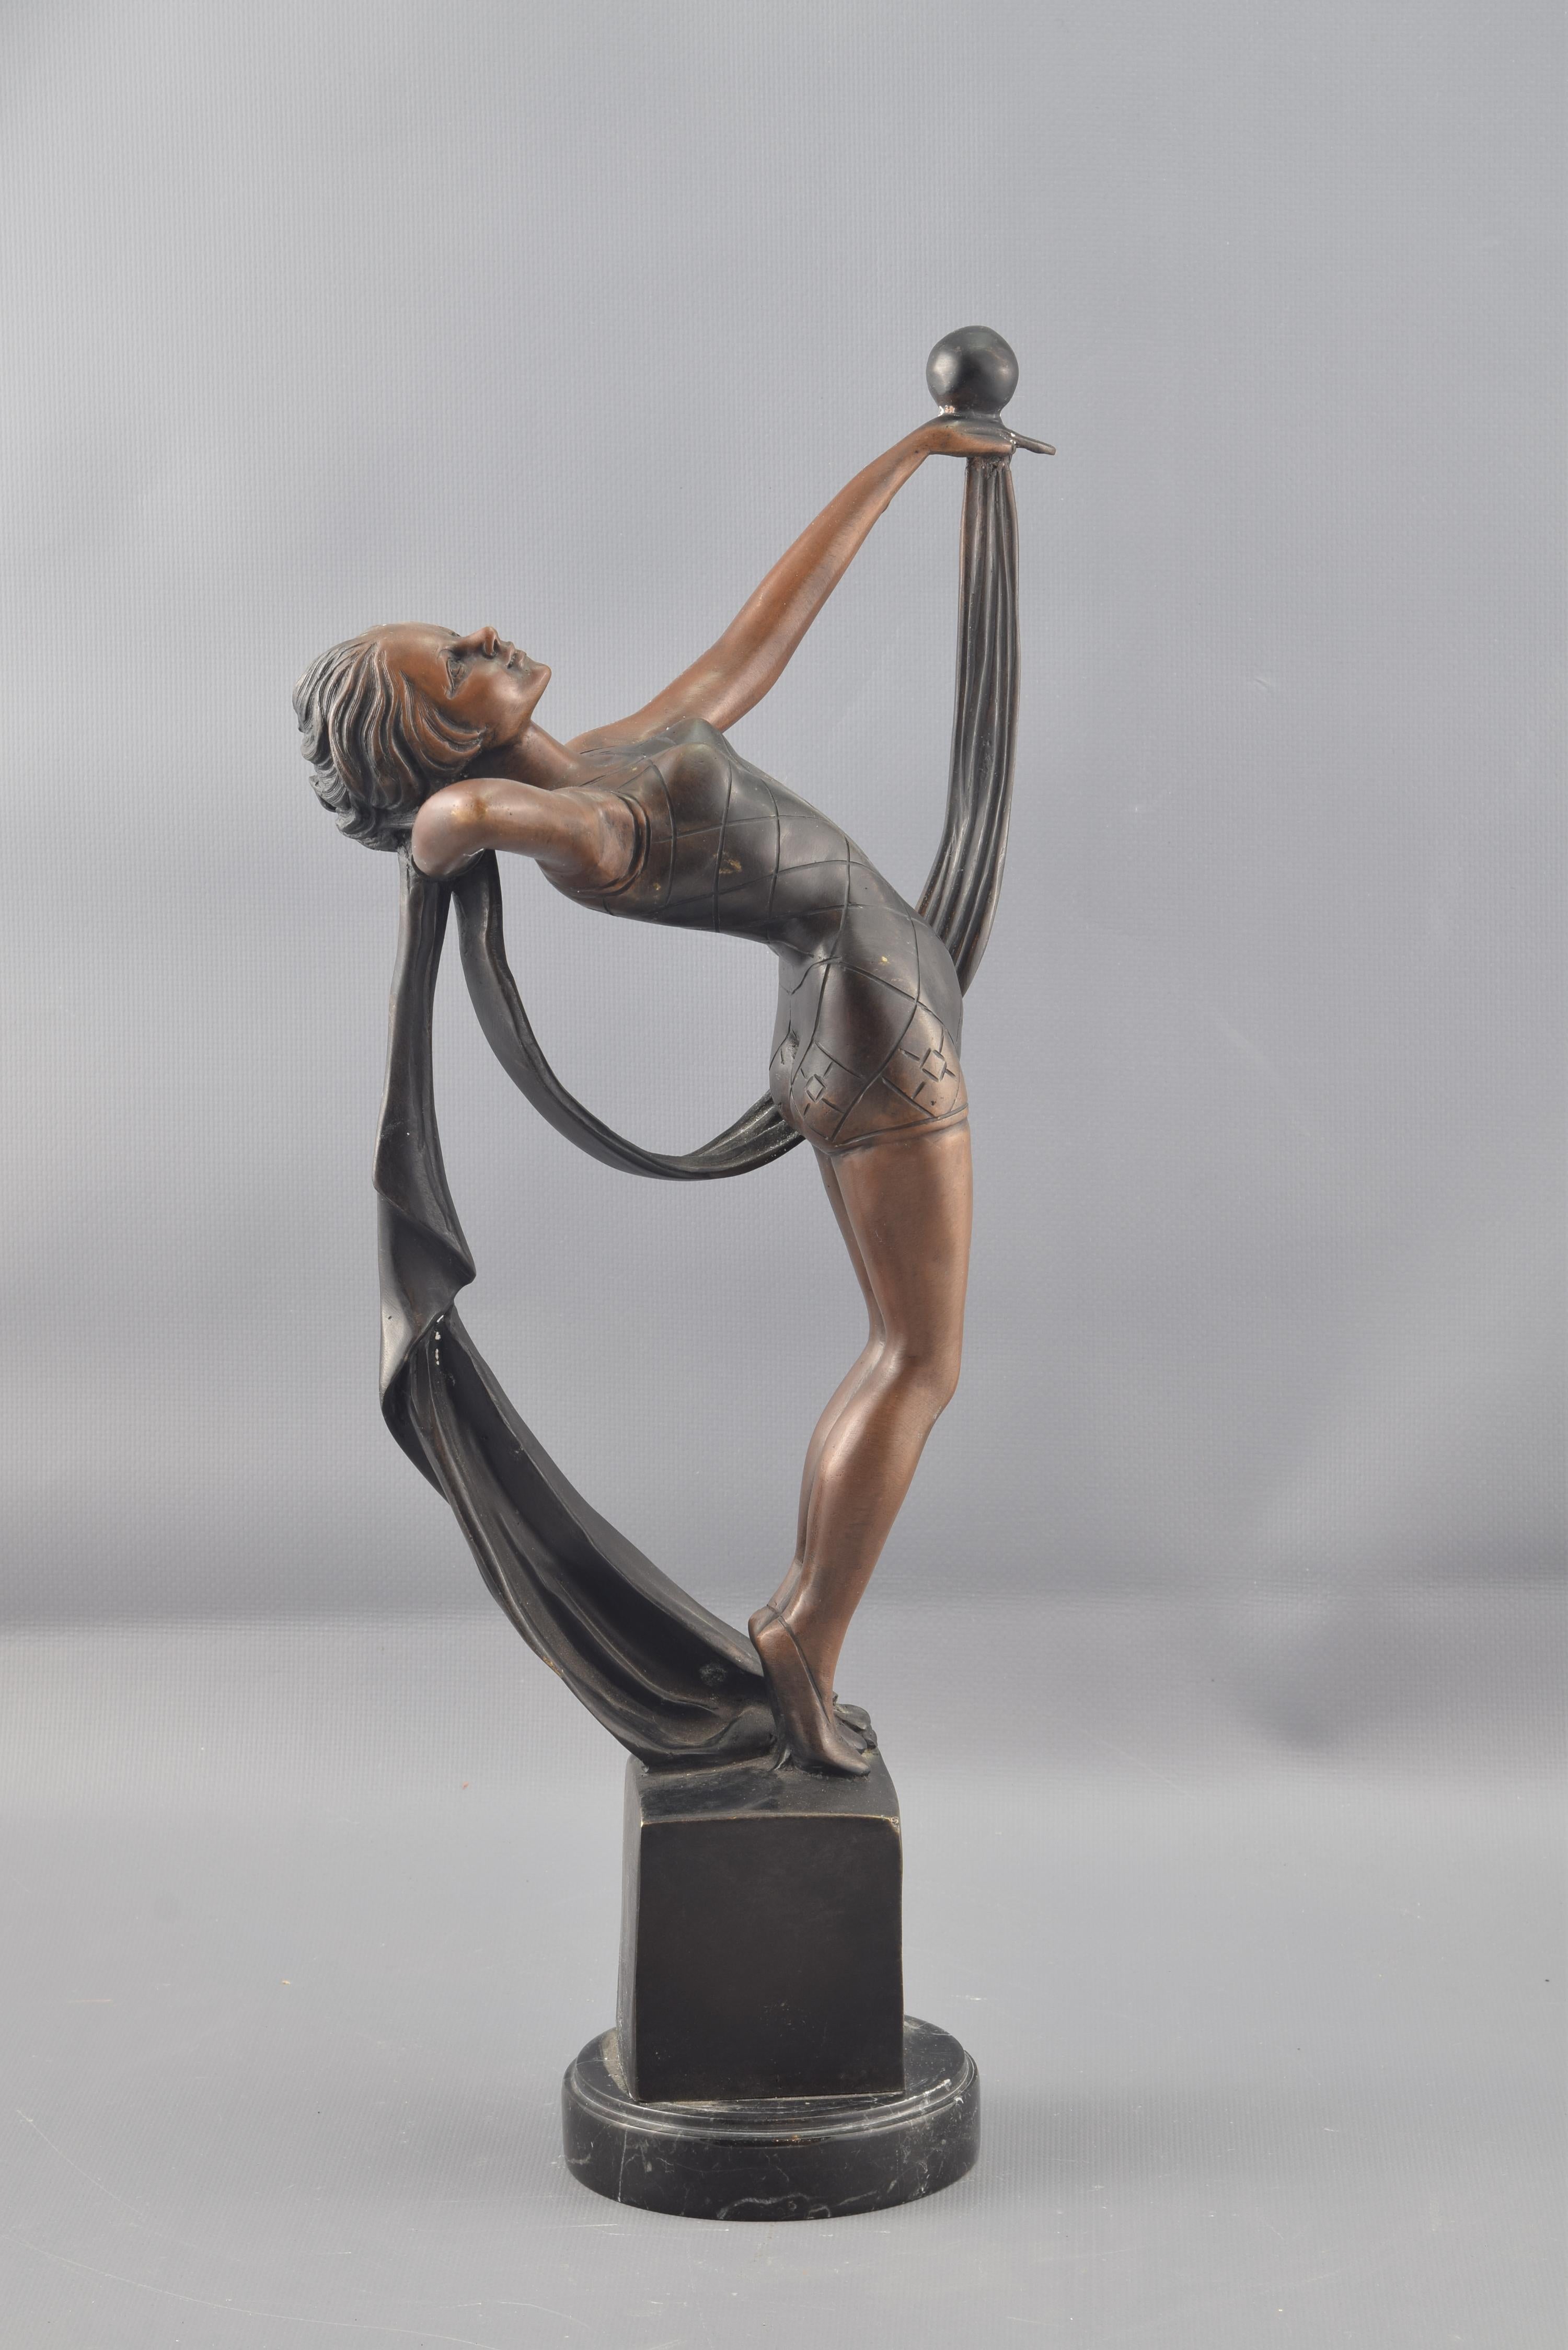 Dancing girl, bronze, after Art Deco models.
A pedestal with square base and rectangular body elevates the female figure that is standing on it. The lady is dressed in shorts and maillot adjusted to the body, tilting her torso backwards and raising